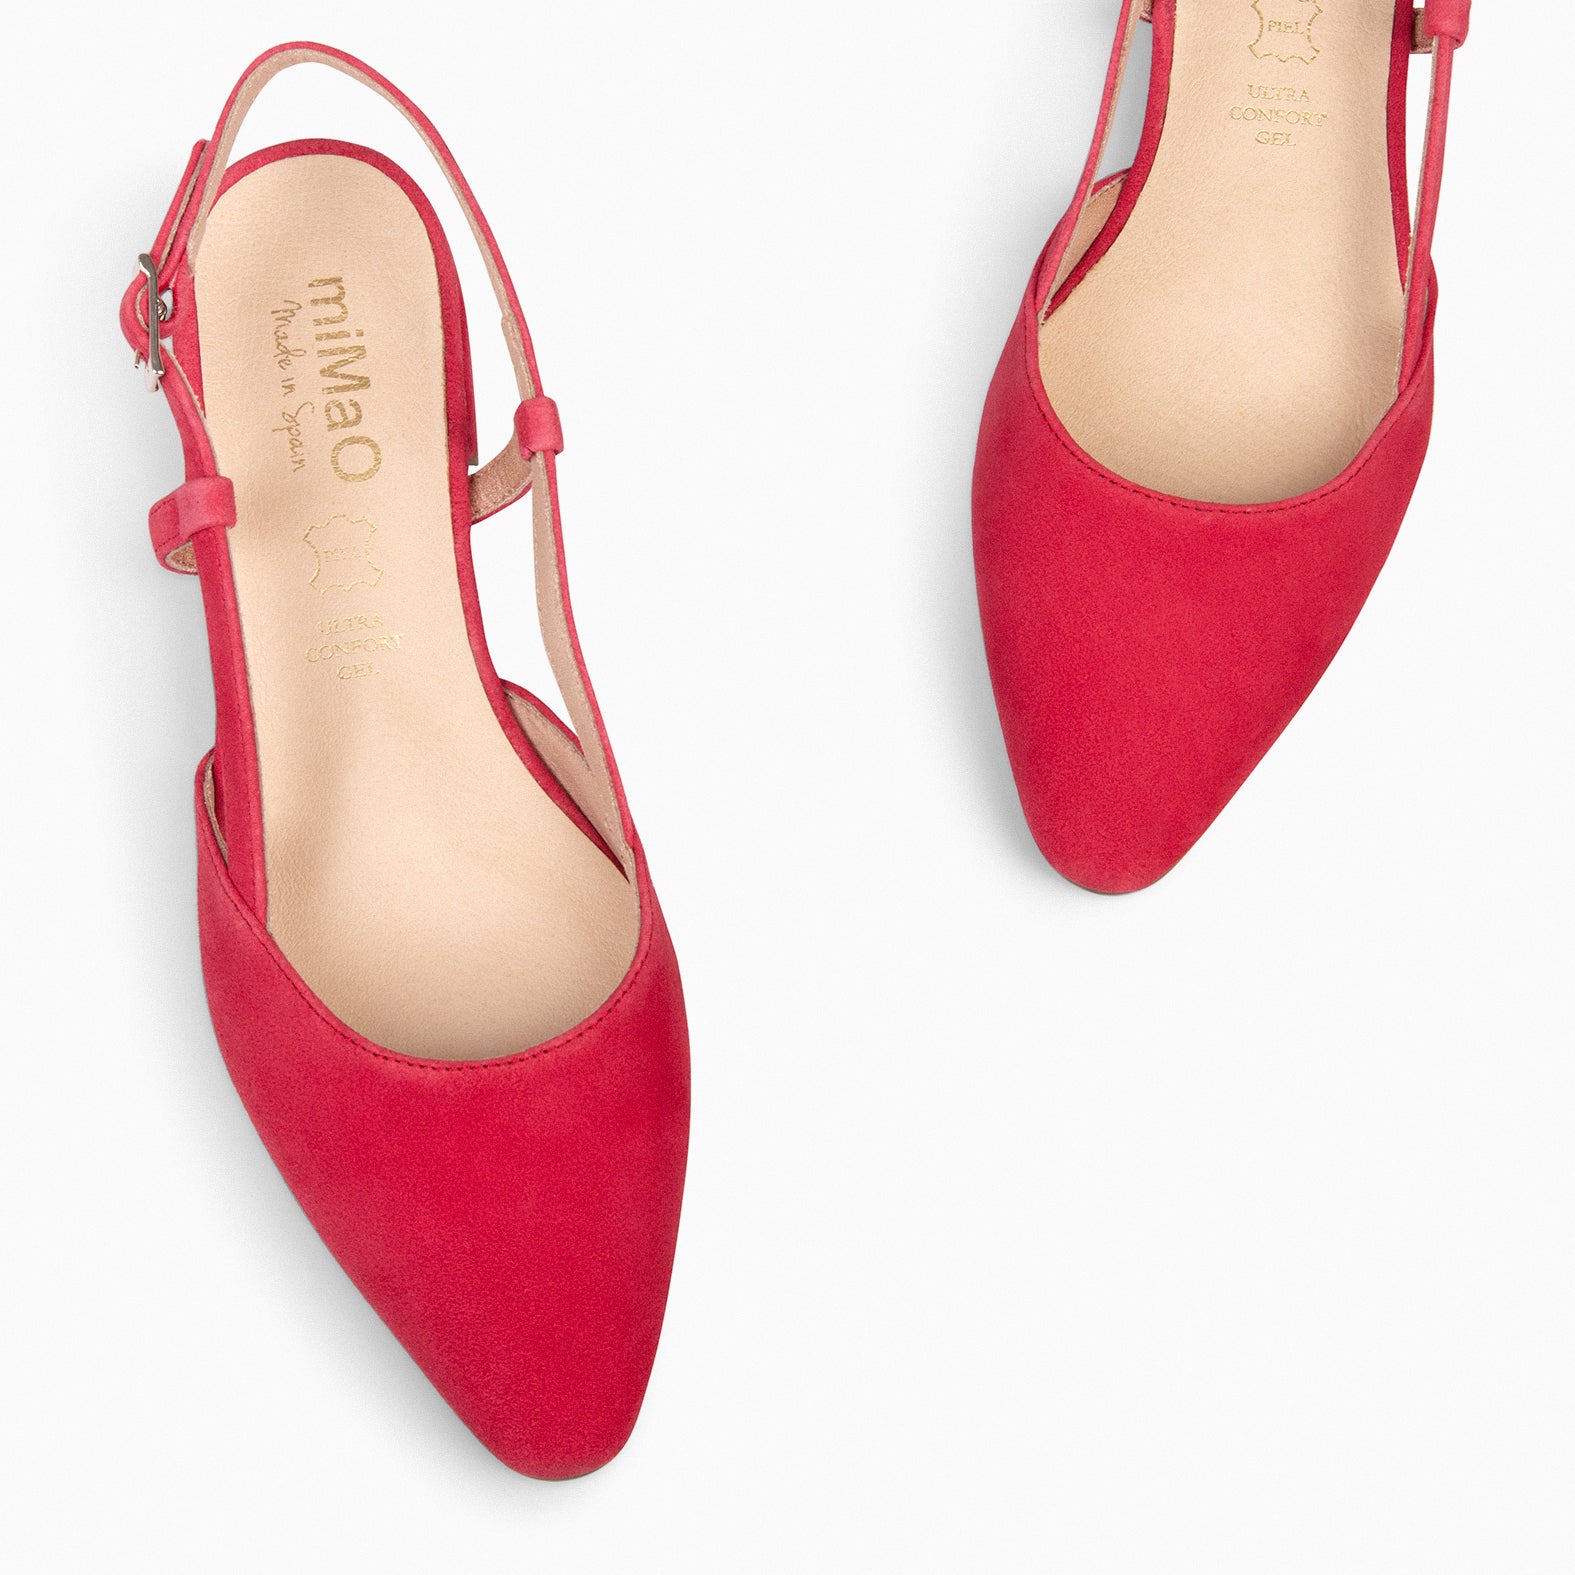 BRUNCH – Chaussures Slingbacks plates ROUGE